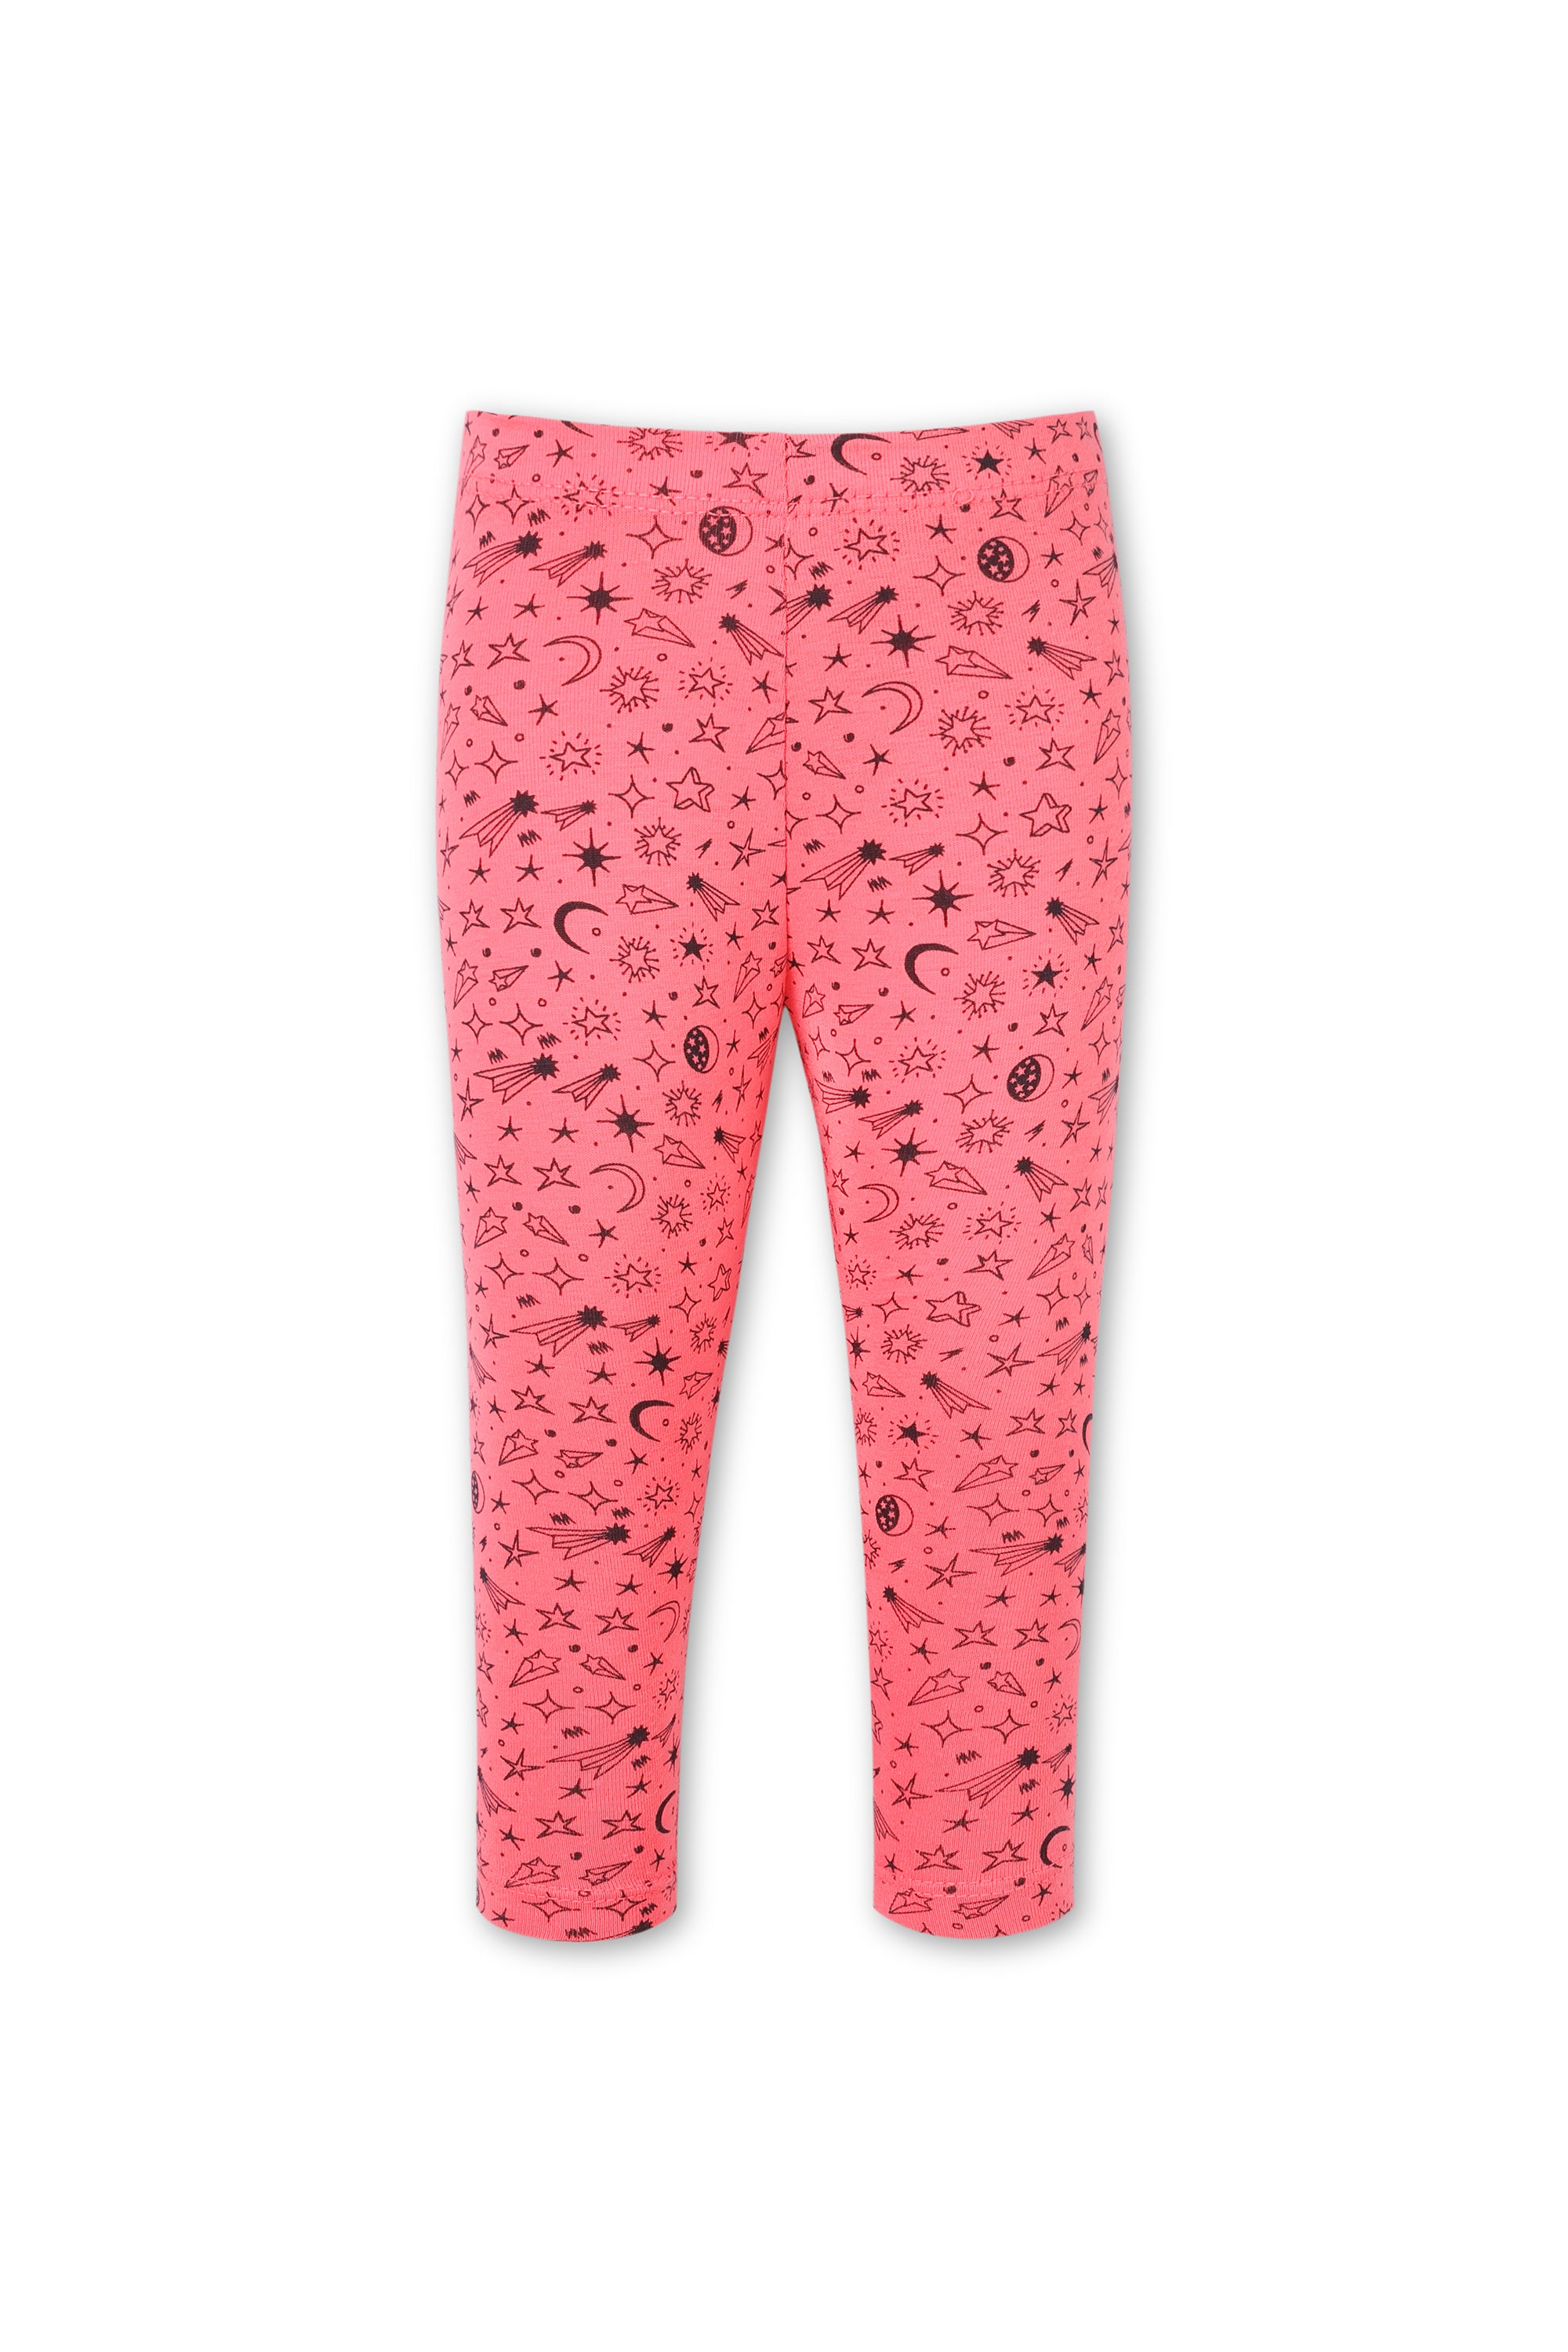 Girls Pink Graphic Tights